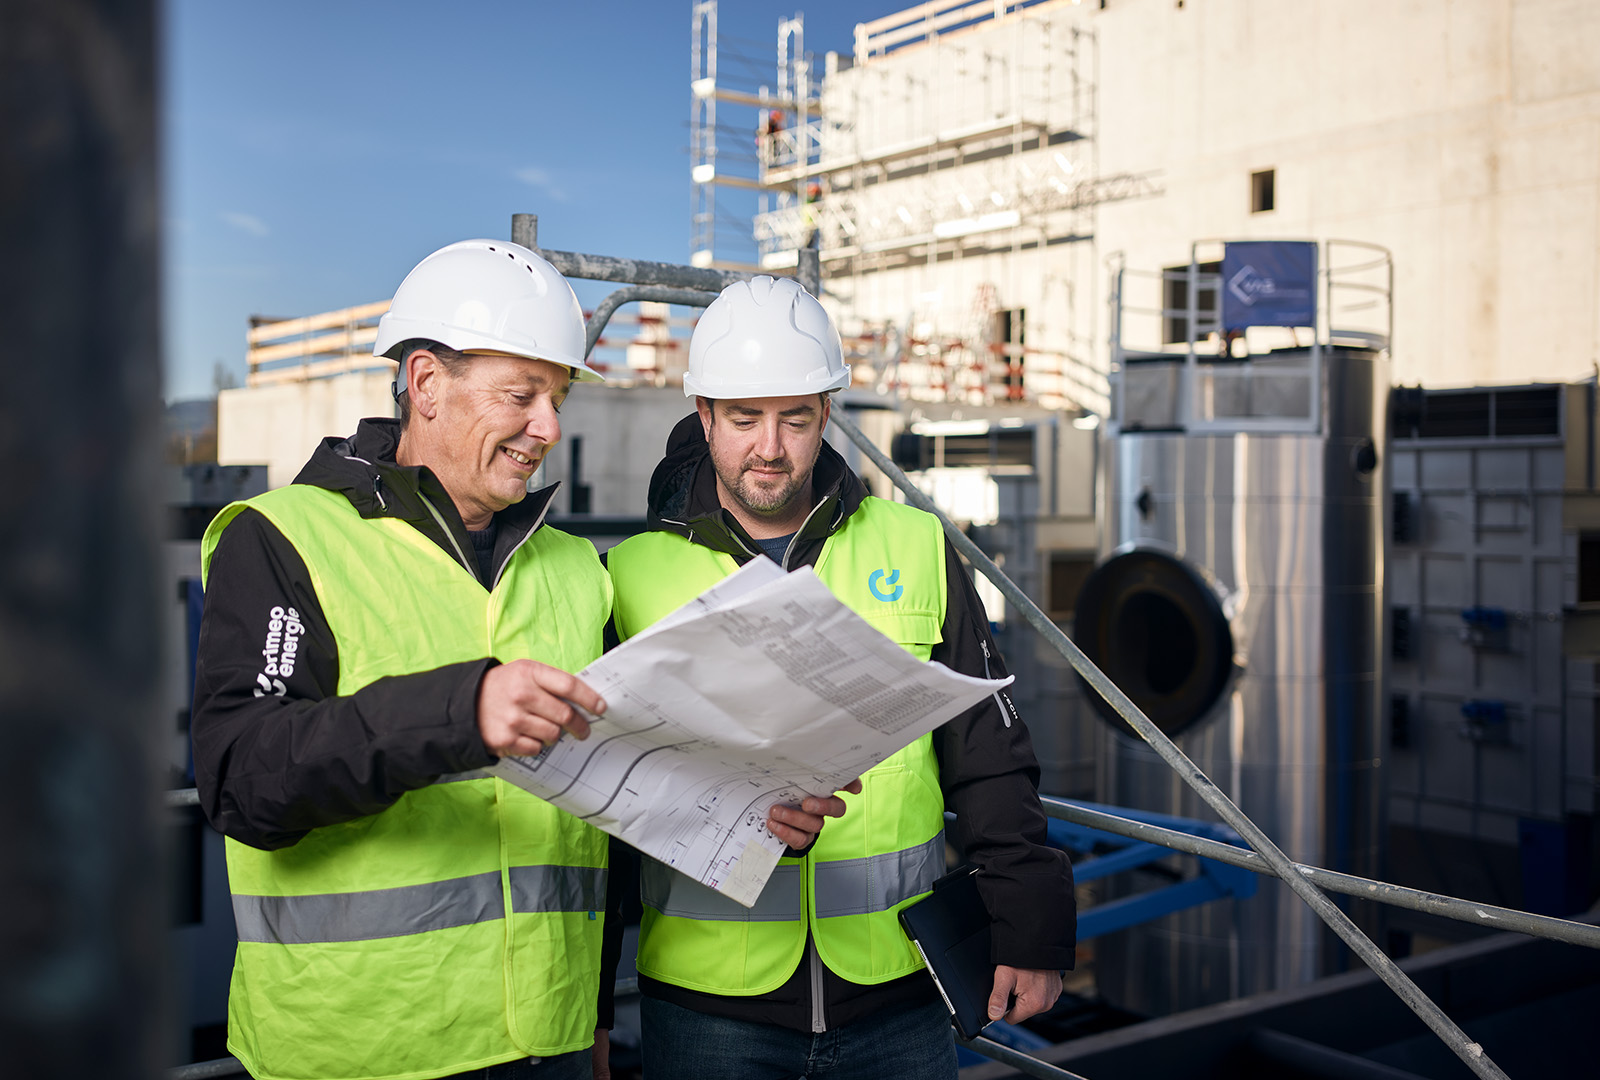 Two construction workers from Primeo Energie wearing hard hats and high-visibility waistcoats discuss construction plans on a building site. Scaffolding and industrial plants can be seen in the background.